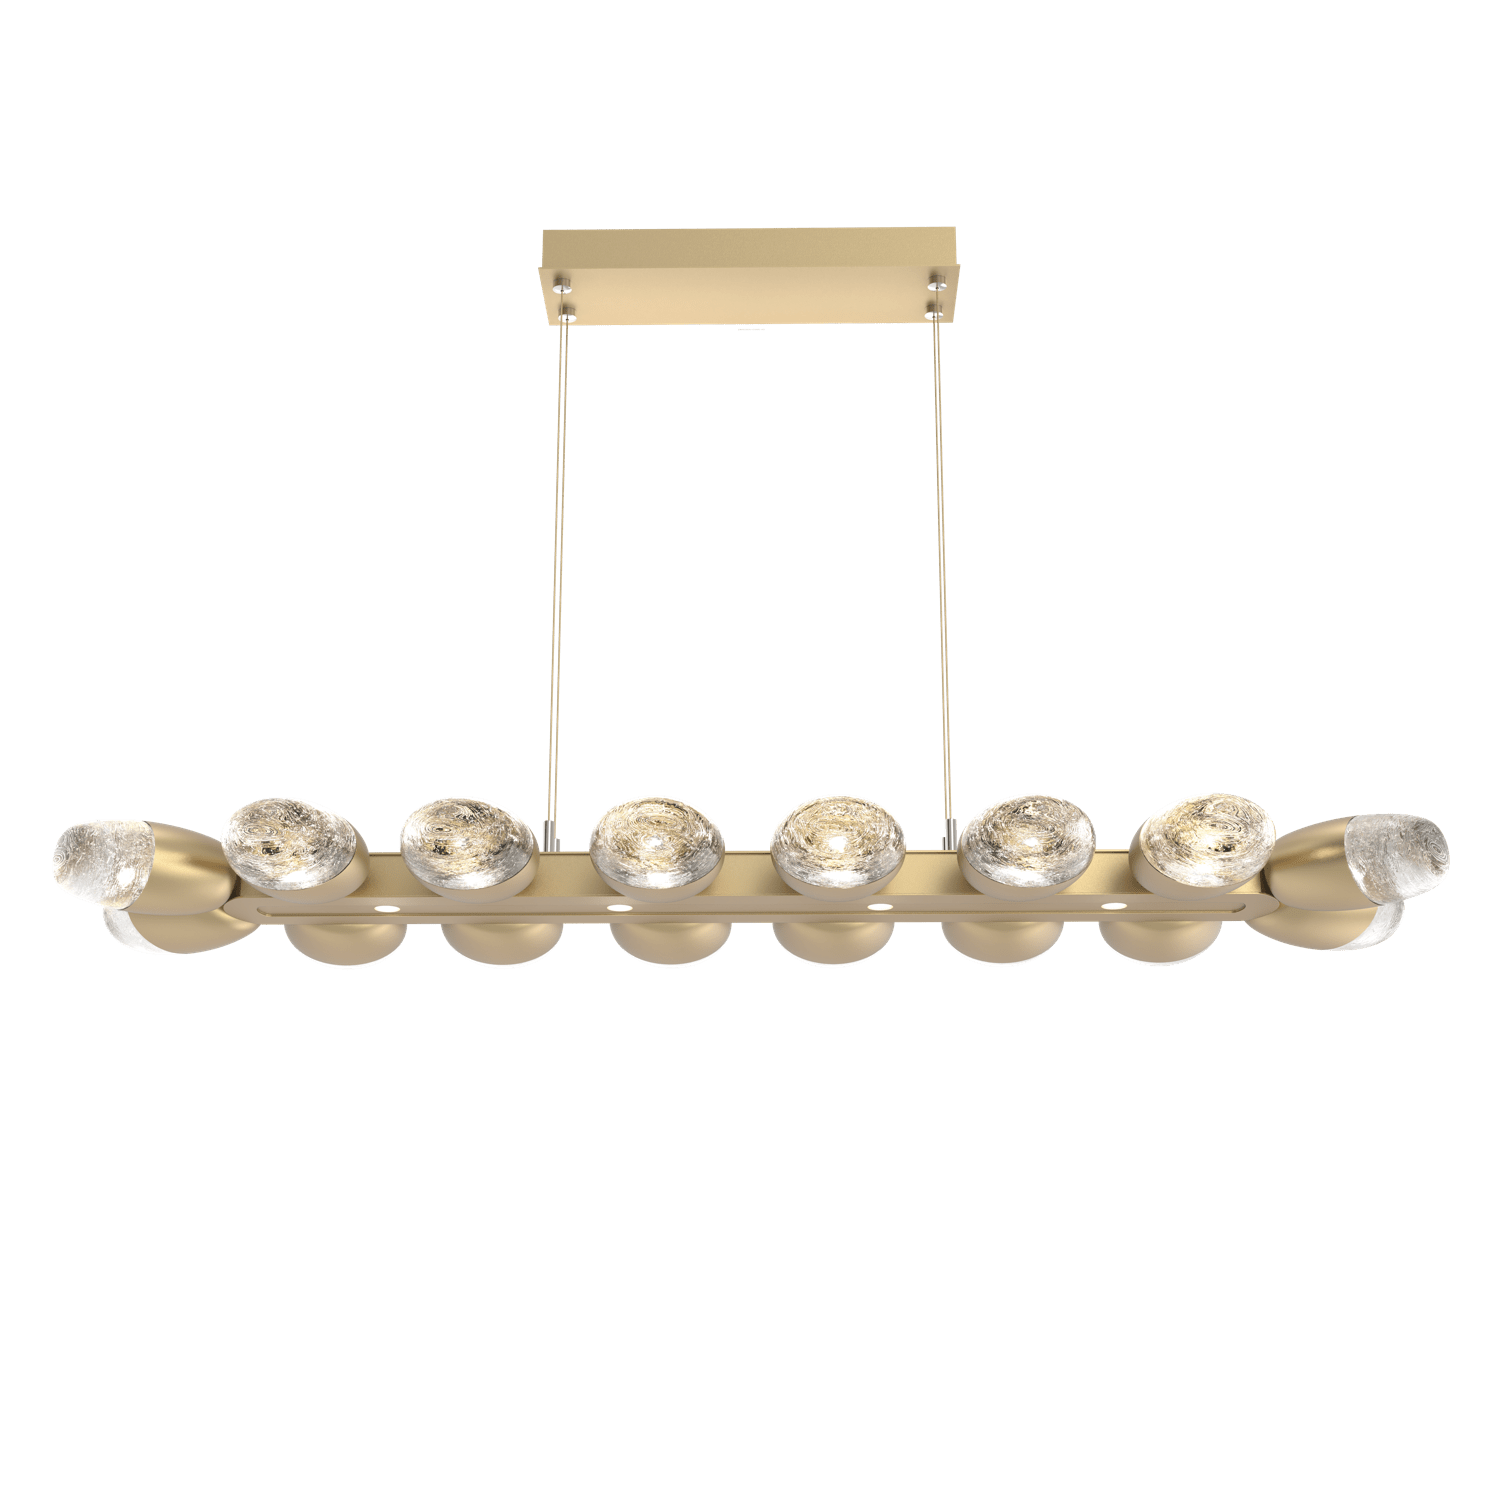 PLB0079-48-GB-Hammerton-Studio-Pebble-48-inch-linear-chandelier-with-gilded-brass-finish-and-clear-cast-glass-shades-and-LED-lamping